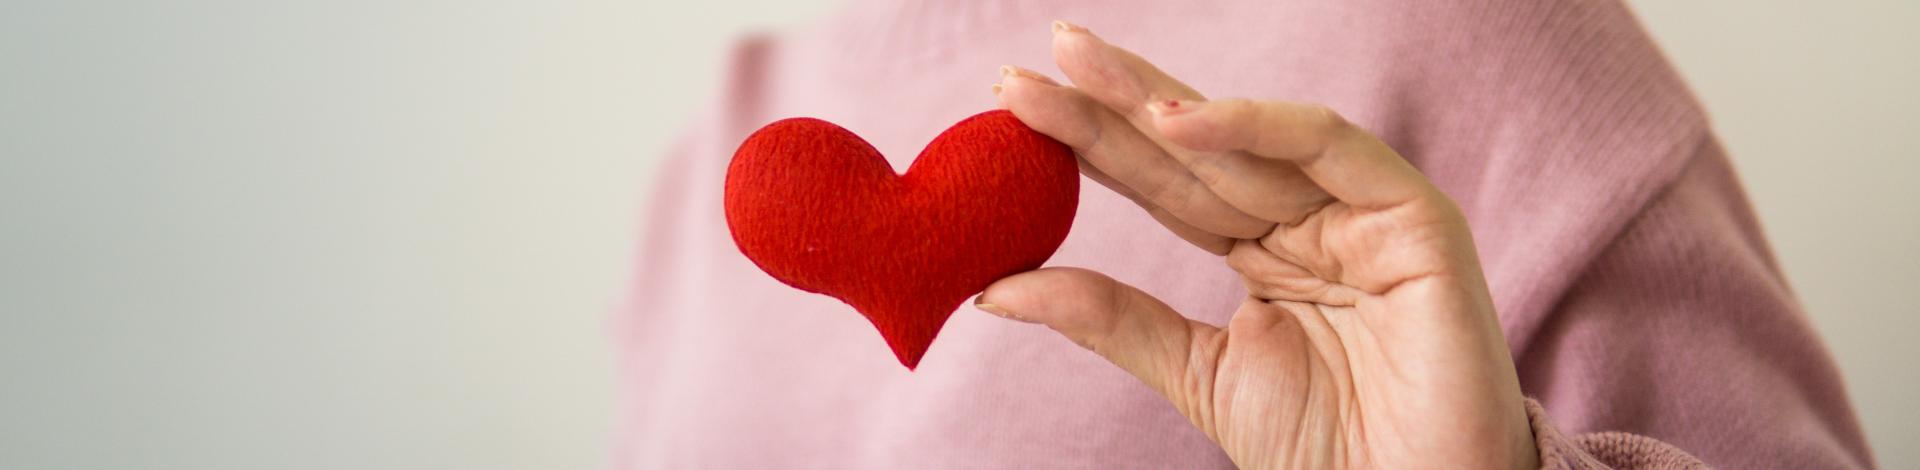 woman holding red felt heart in her hand to show care